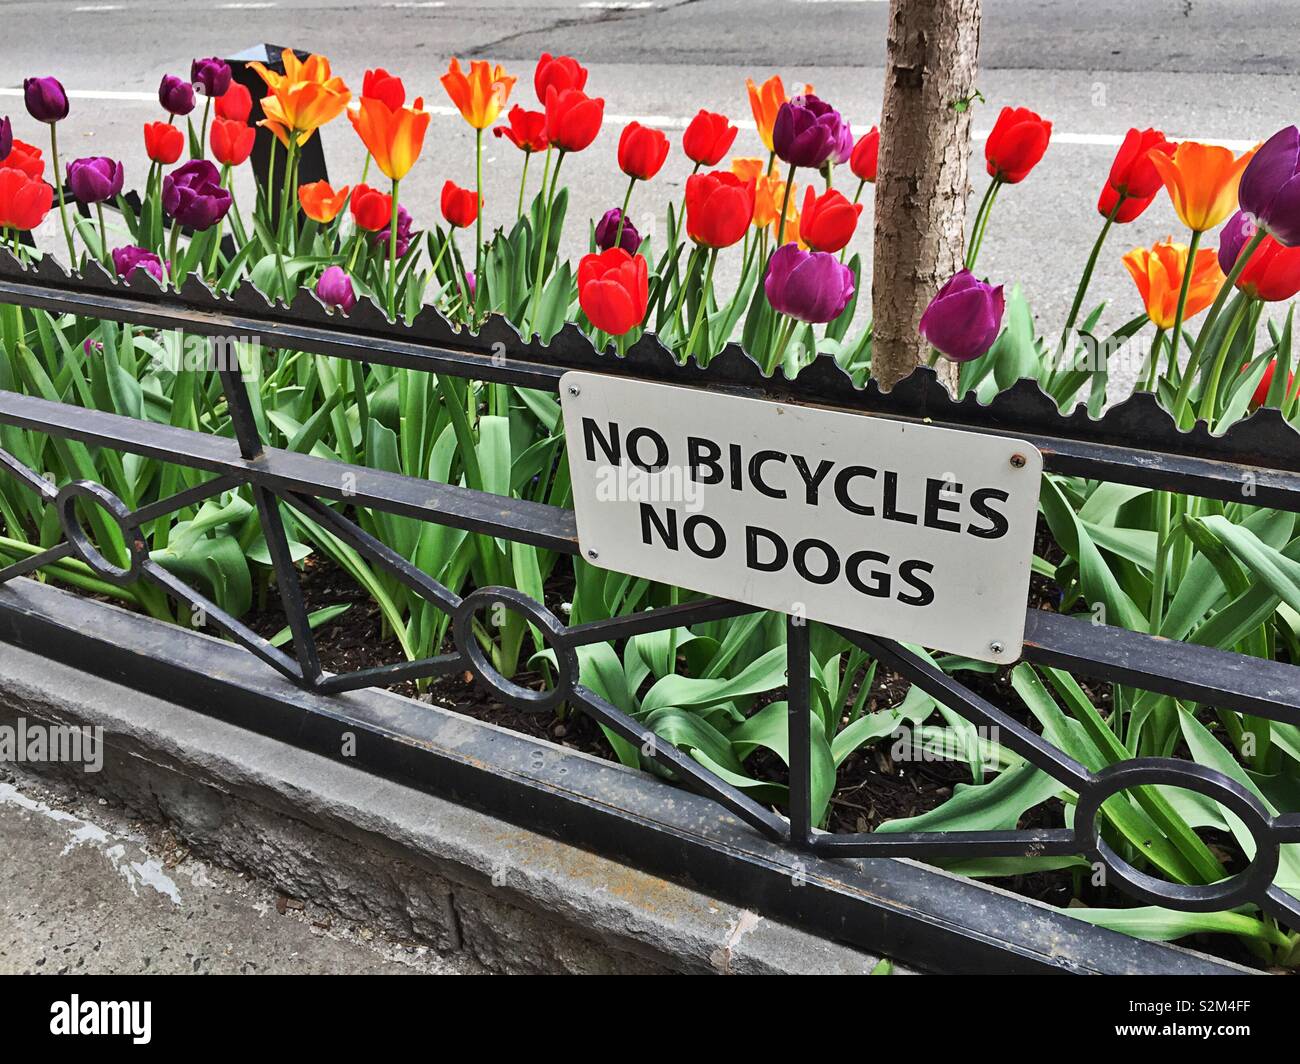 City tree pit with tulips and fence with sign no bicycles no dogs Stock Photo